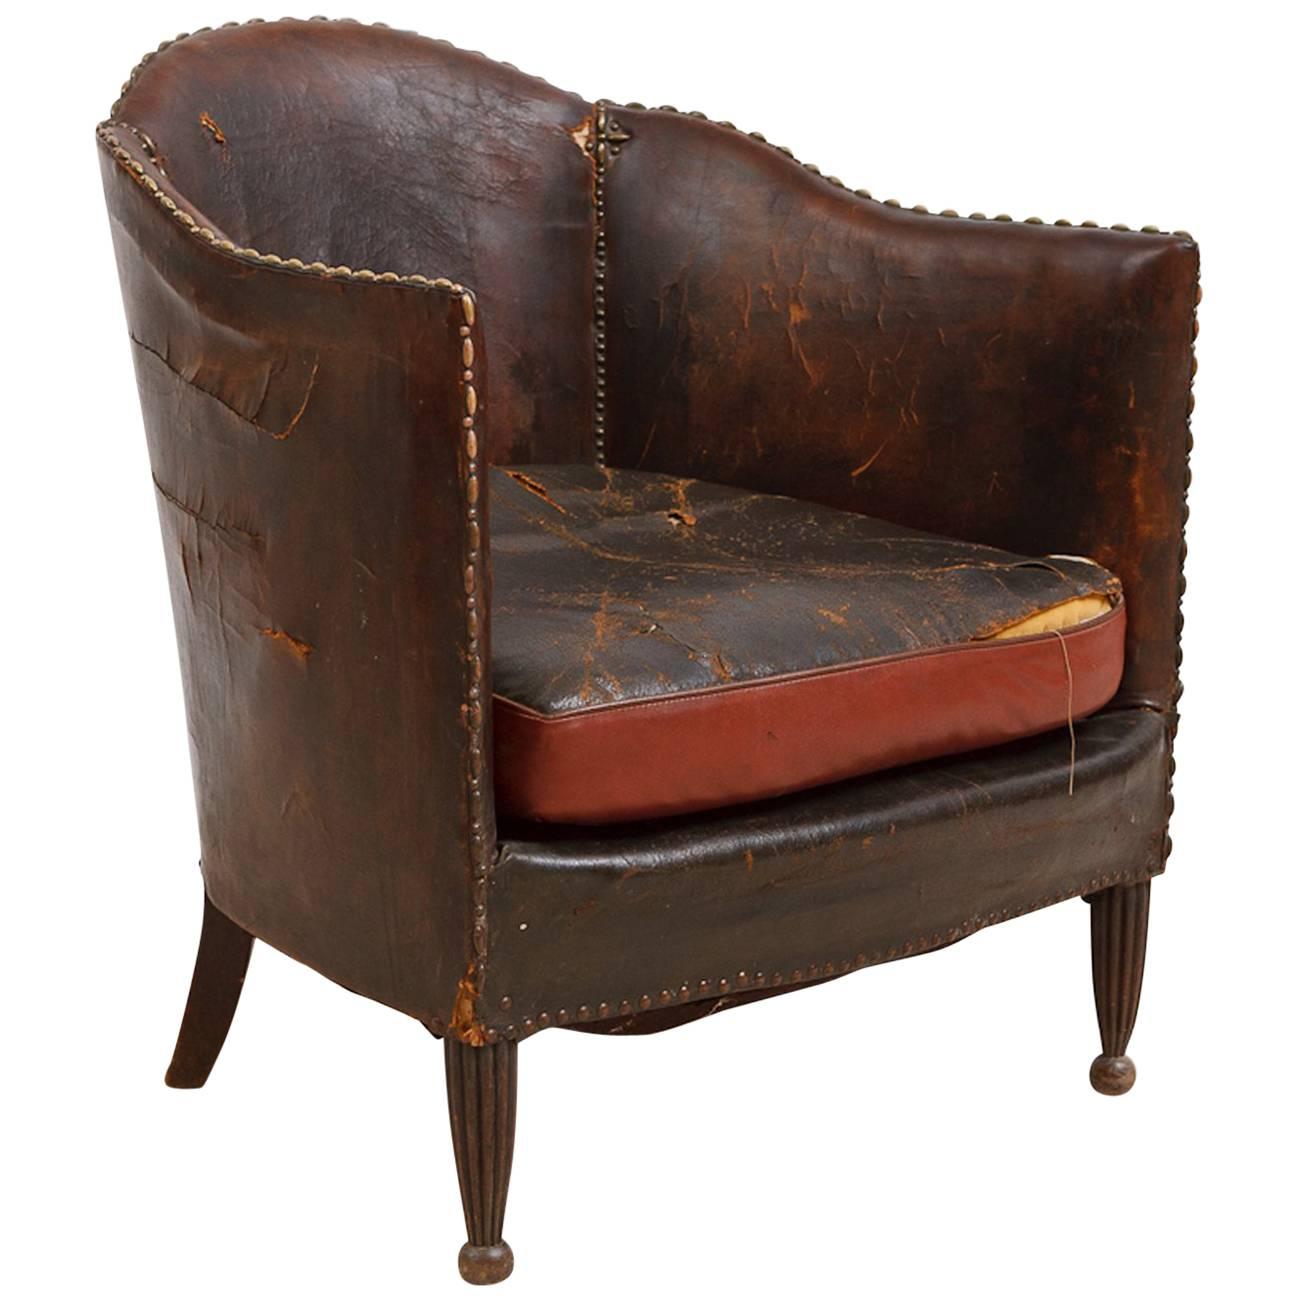 1920's French Art Deco Club Chair Upholstered in Original Leather